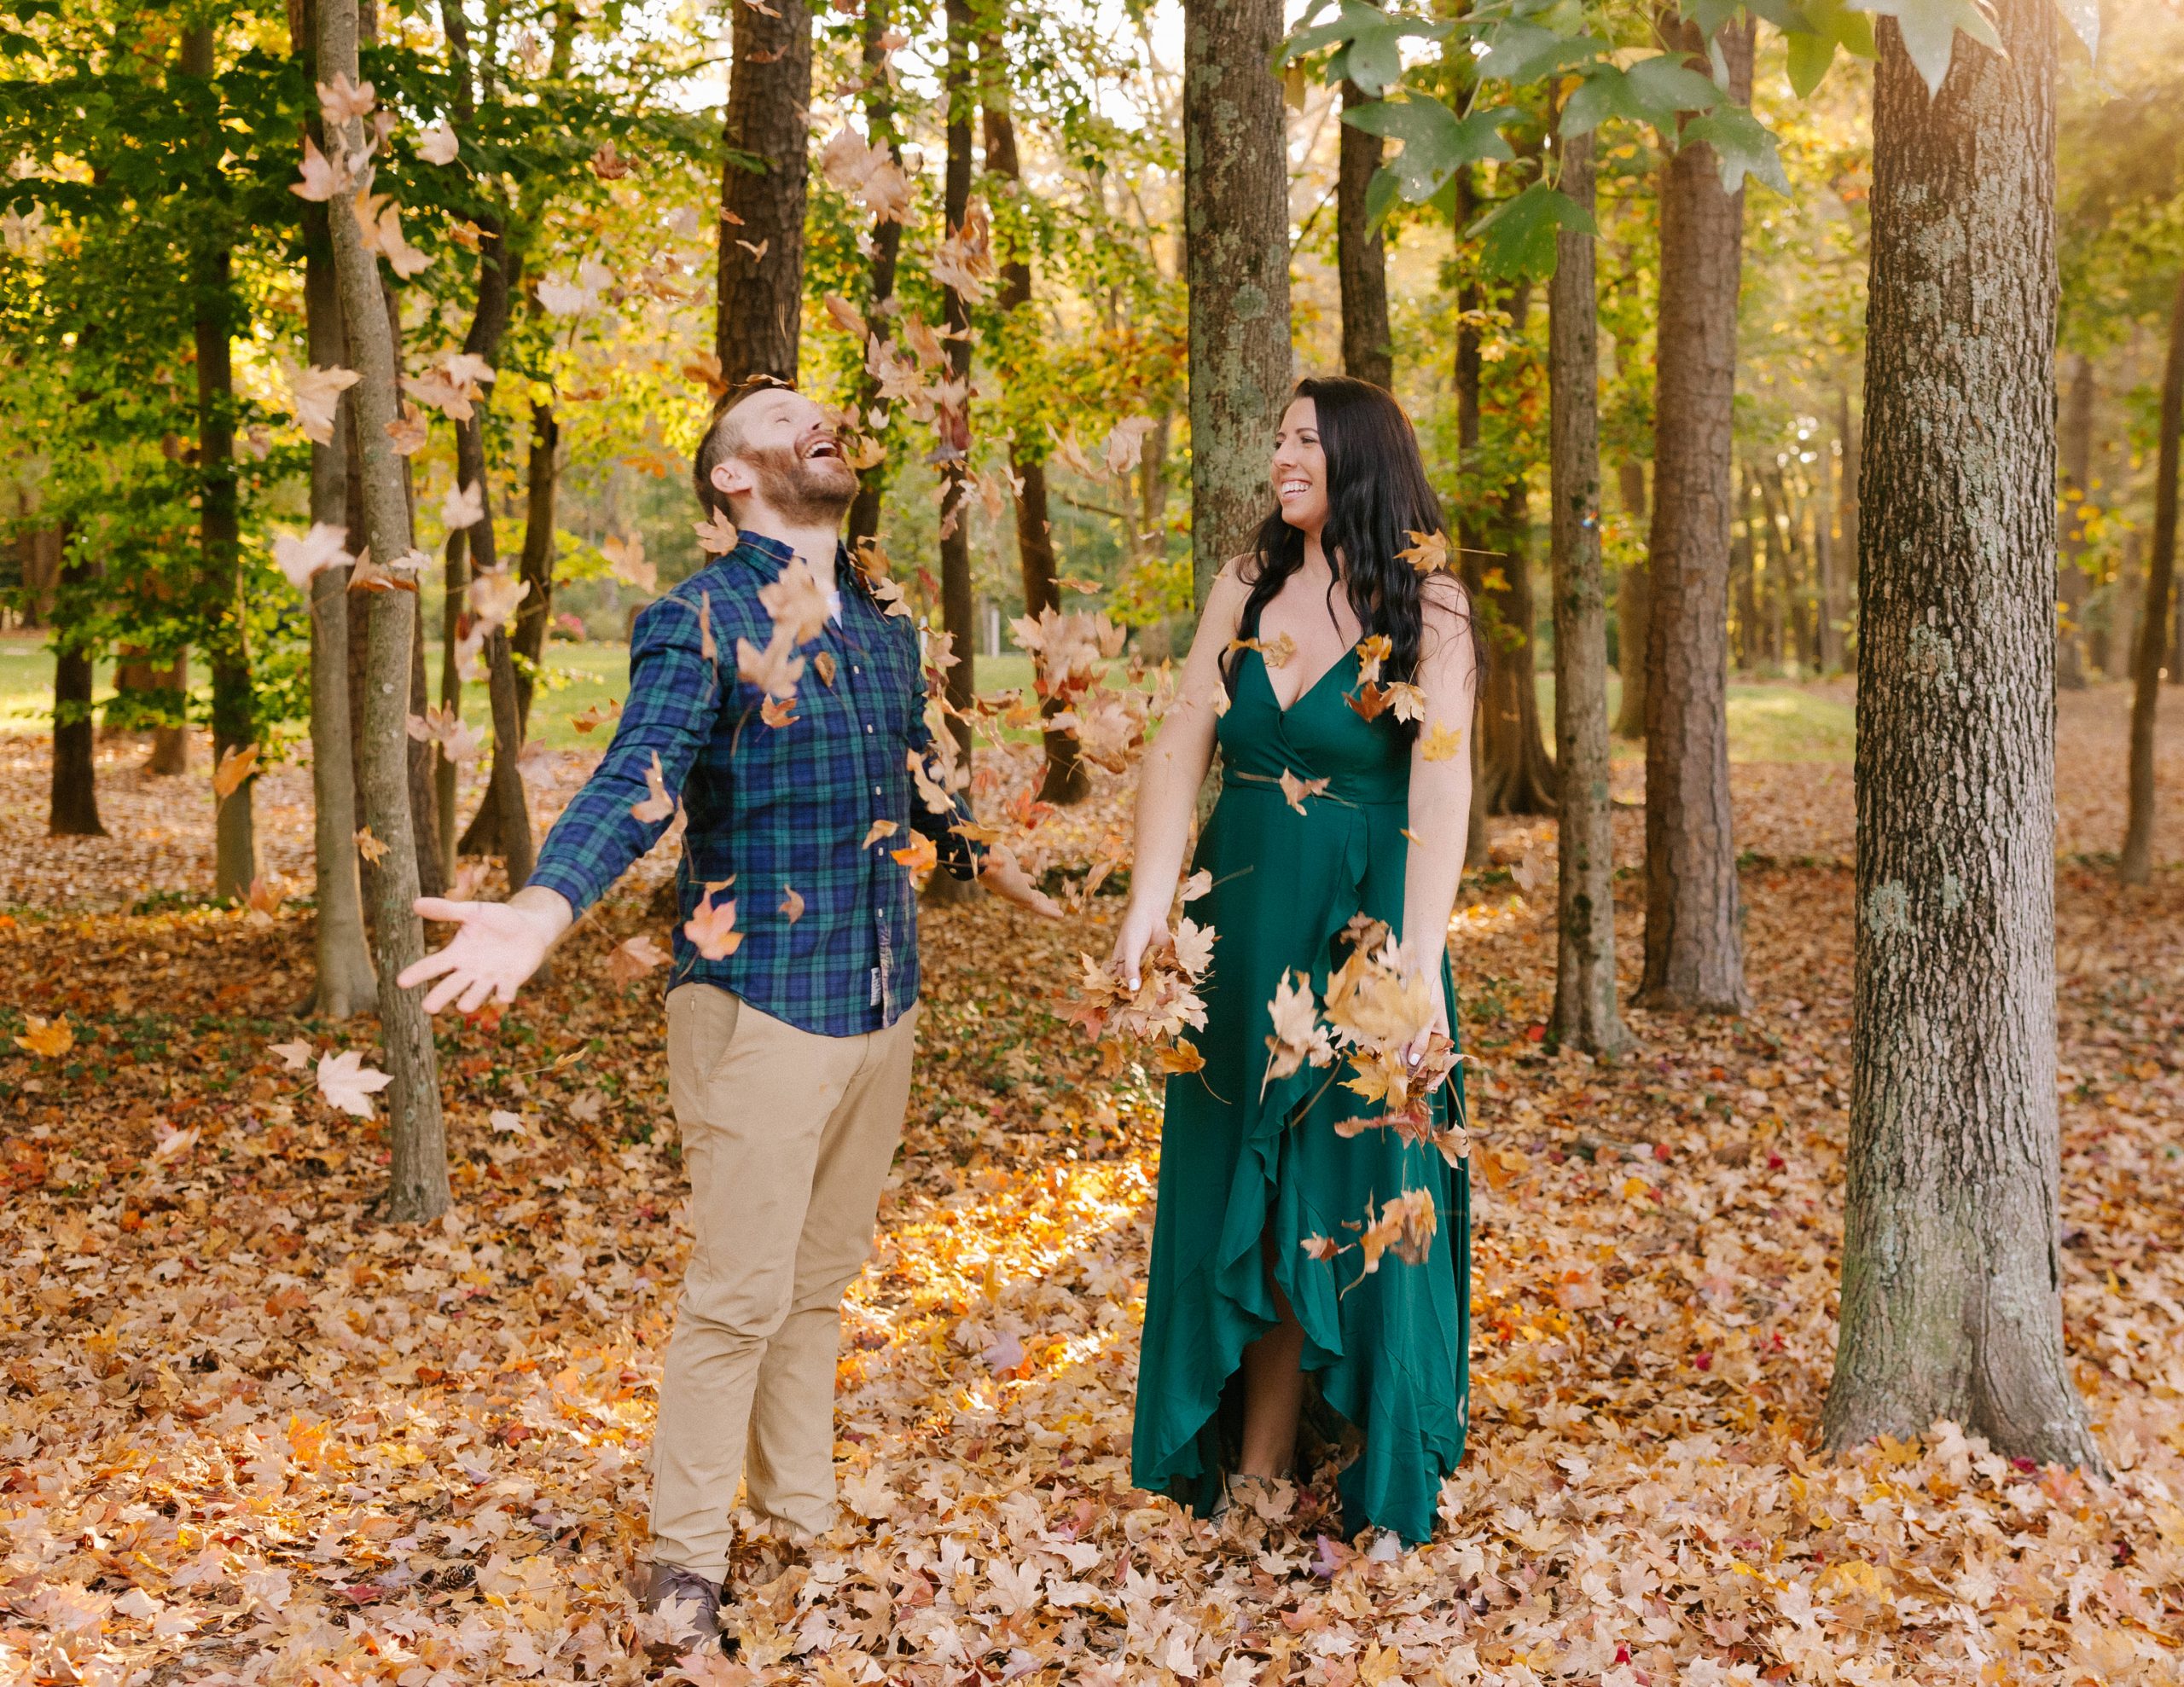 Playful couple throwing fall leaves in a photo taken by Winston Salem photographer Chelsea Renay